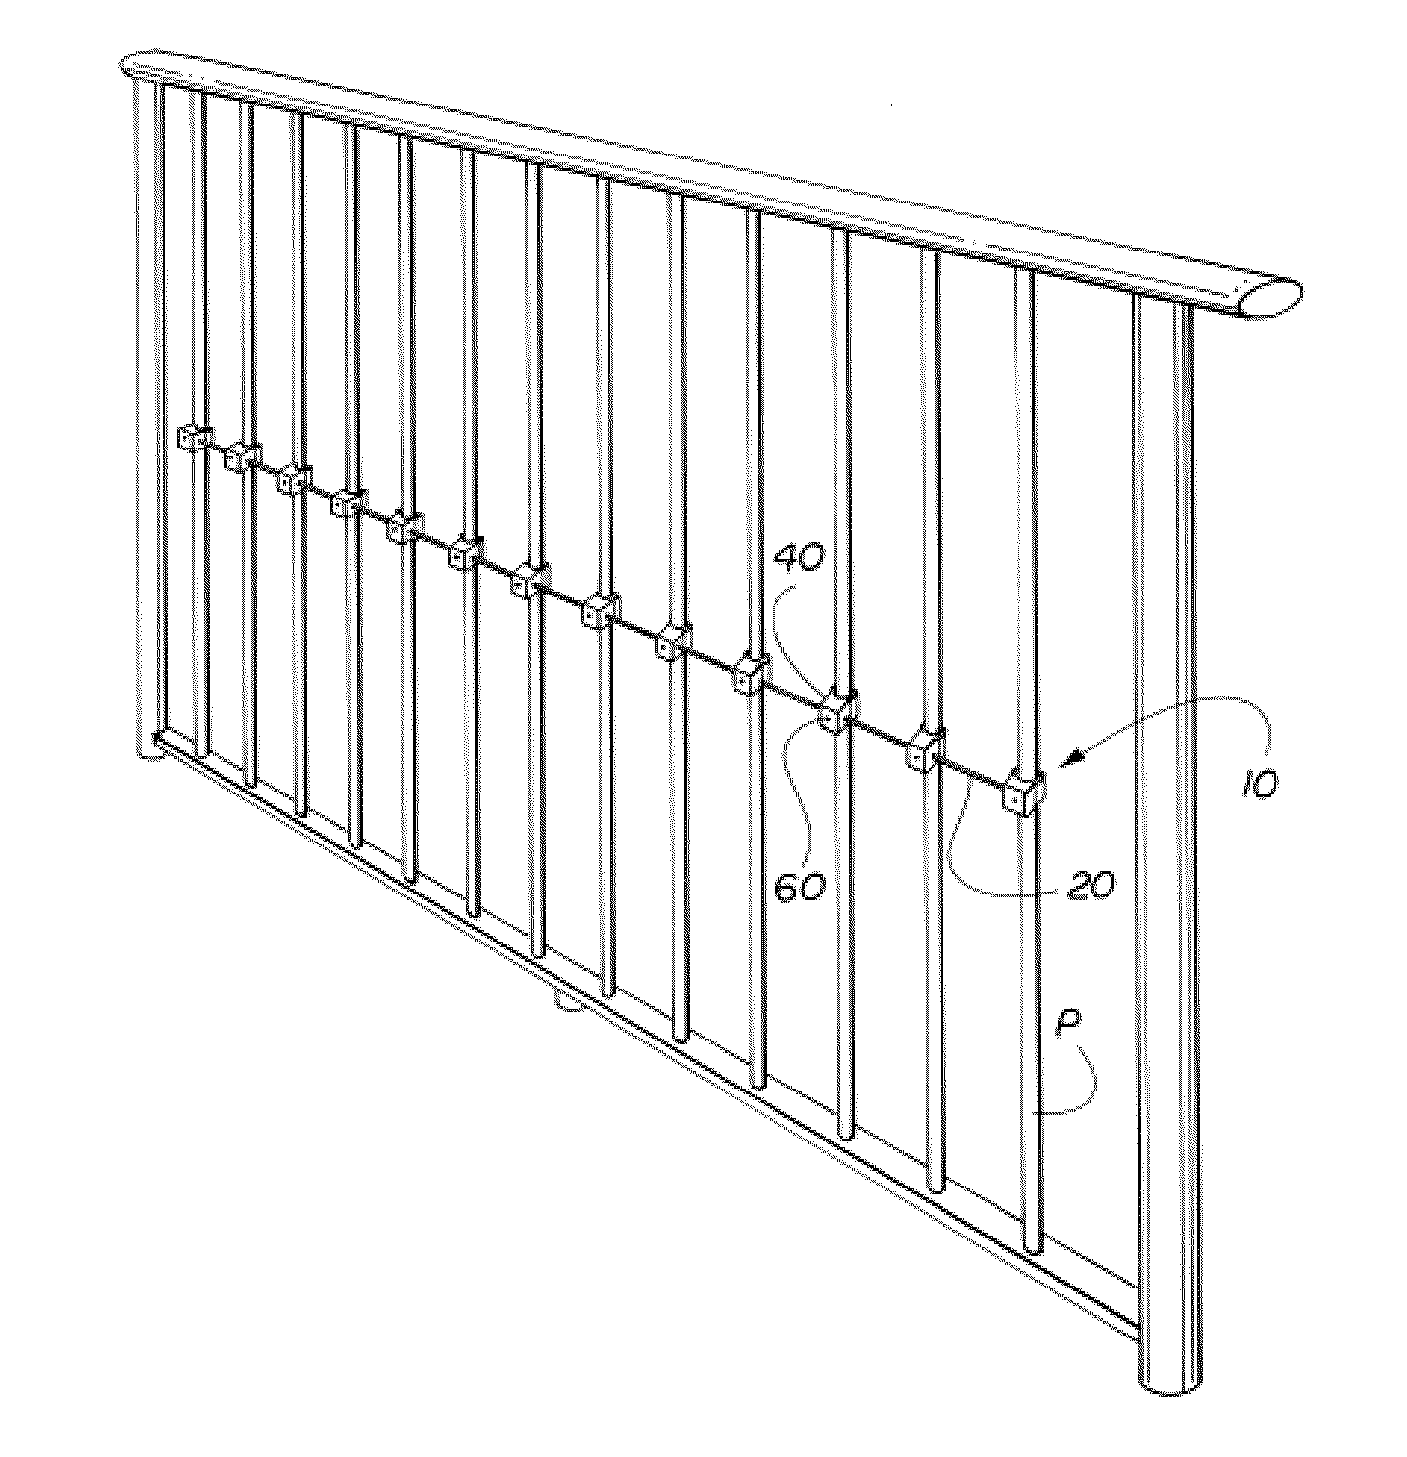 Apparatus and method for eliminating and preventing audible vibration in high rise railings